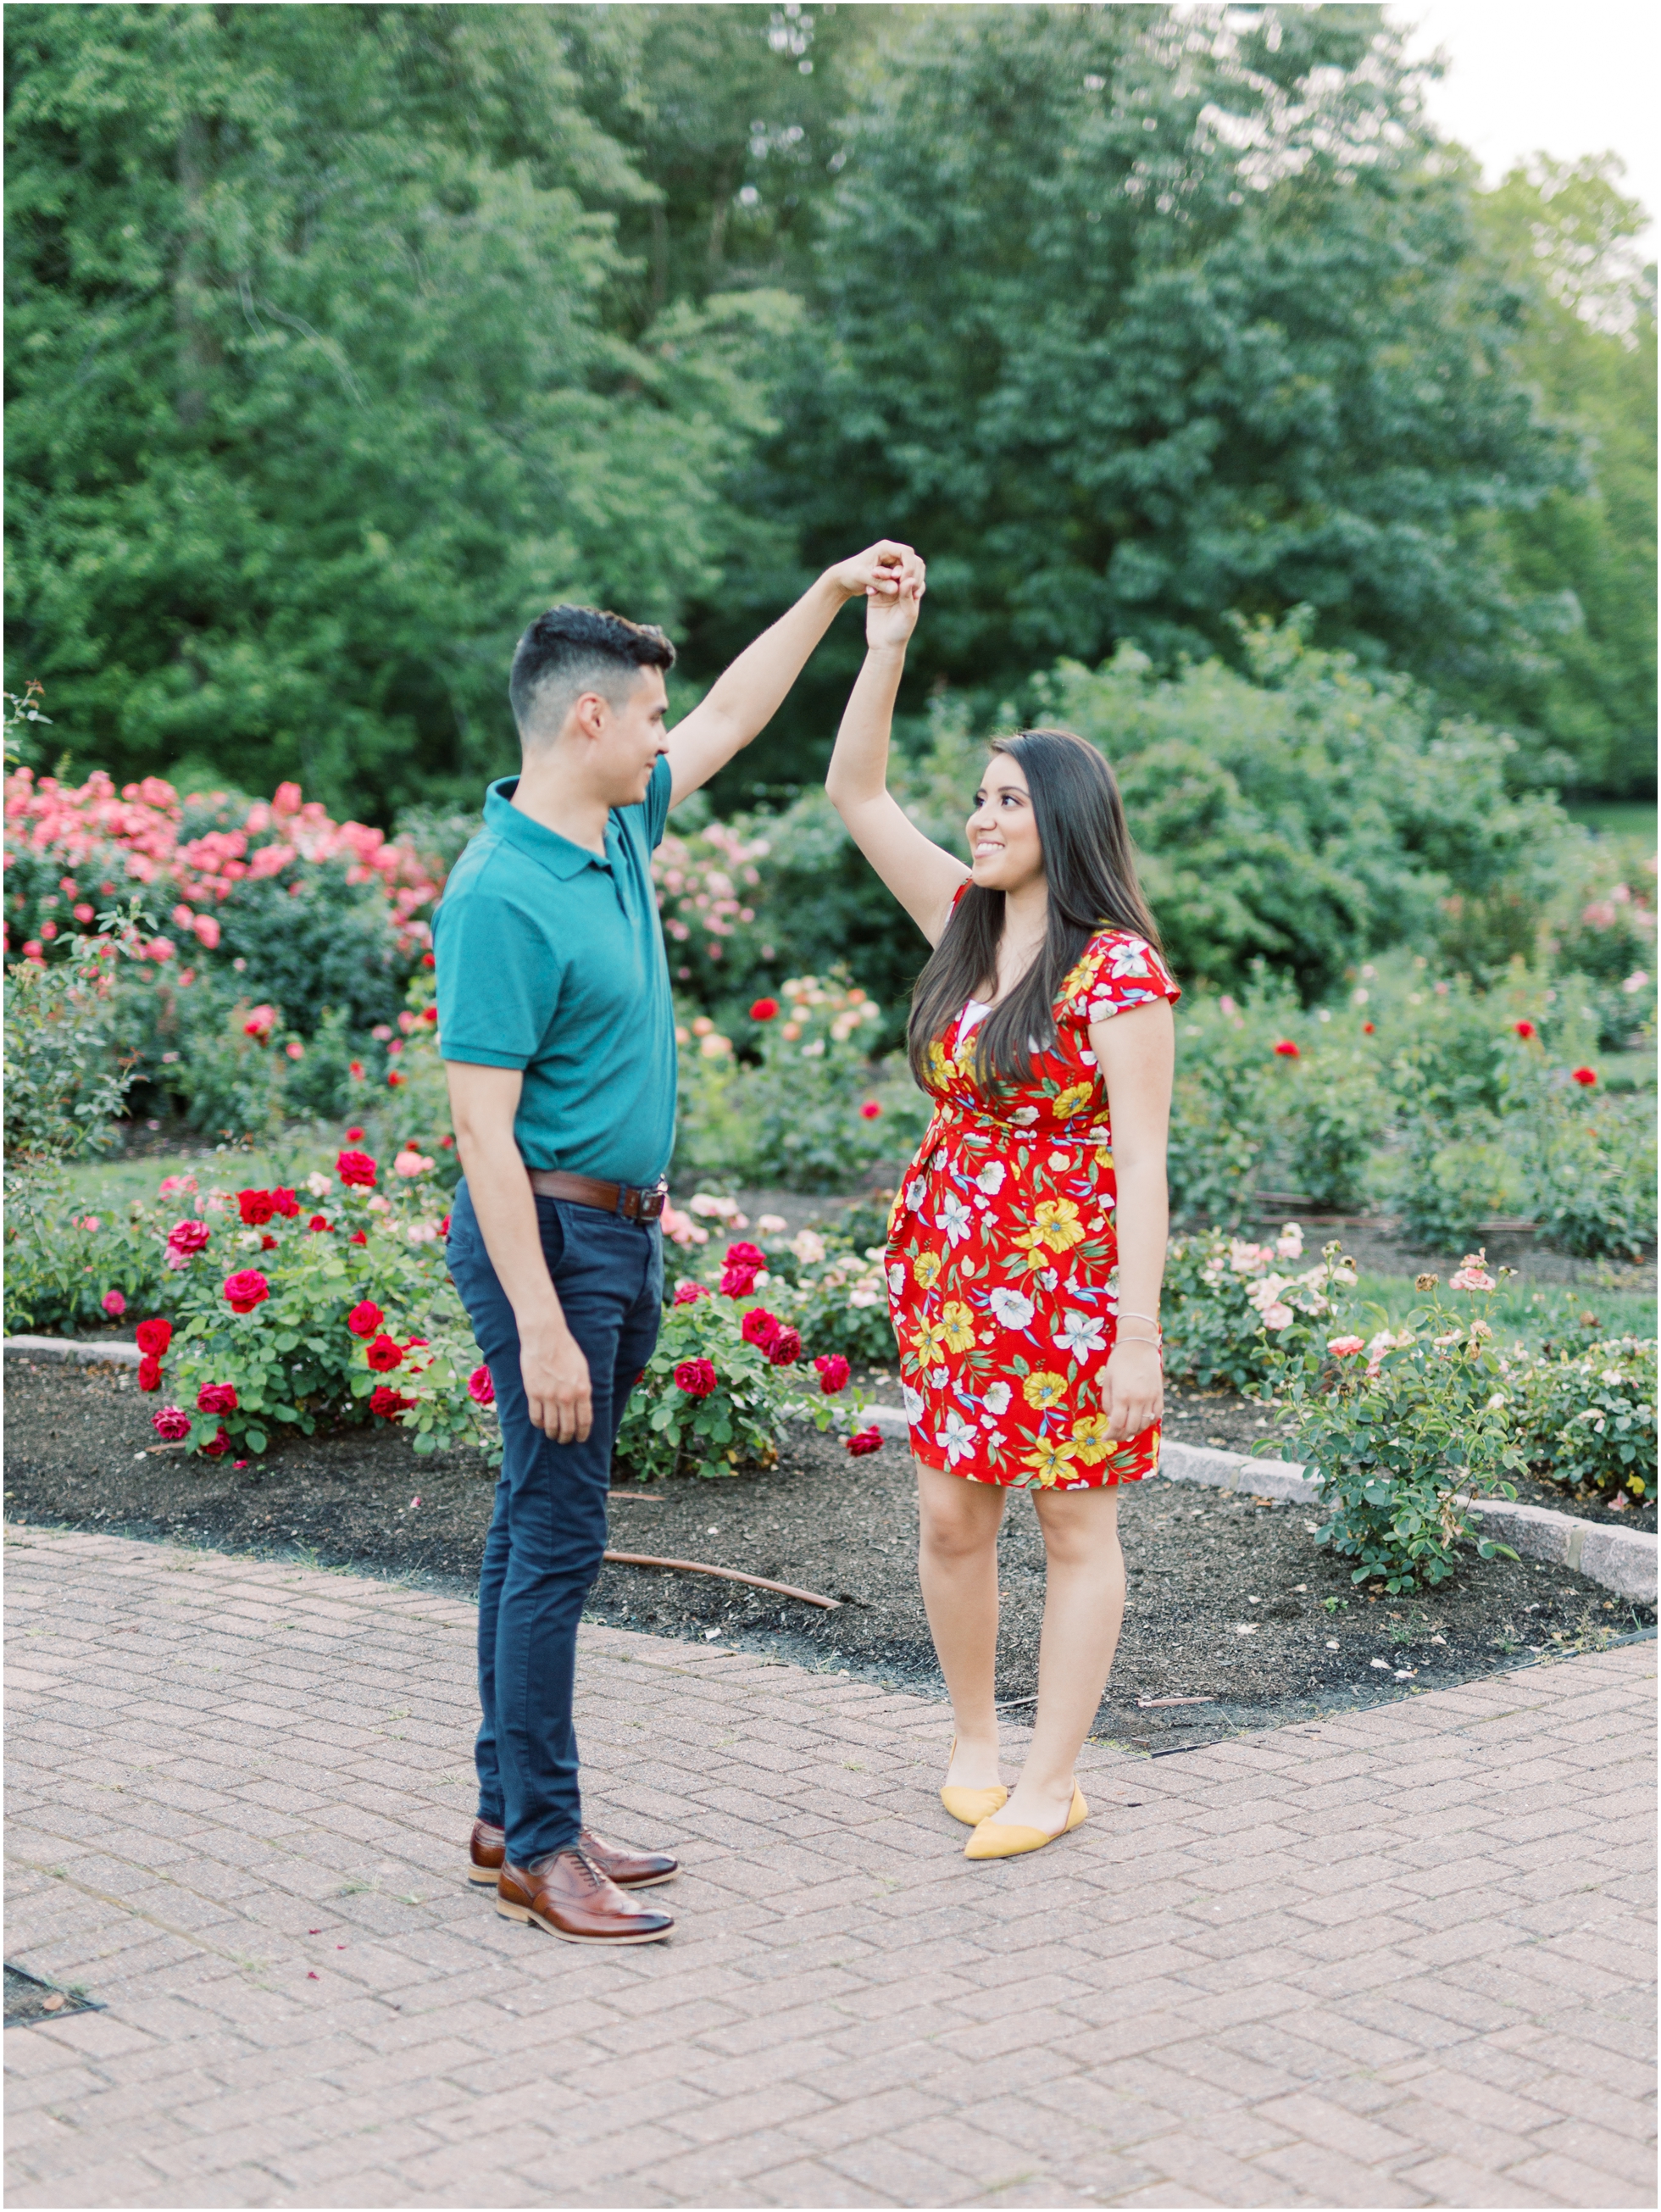 Engagement Session in a Colorful, Romantic Rose Garden